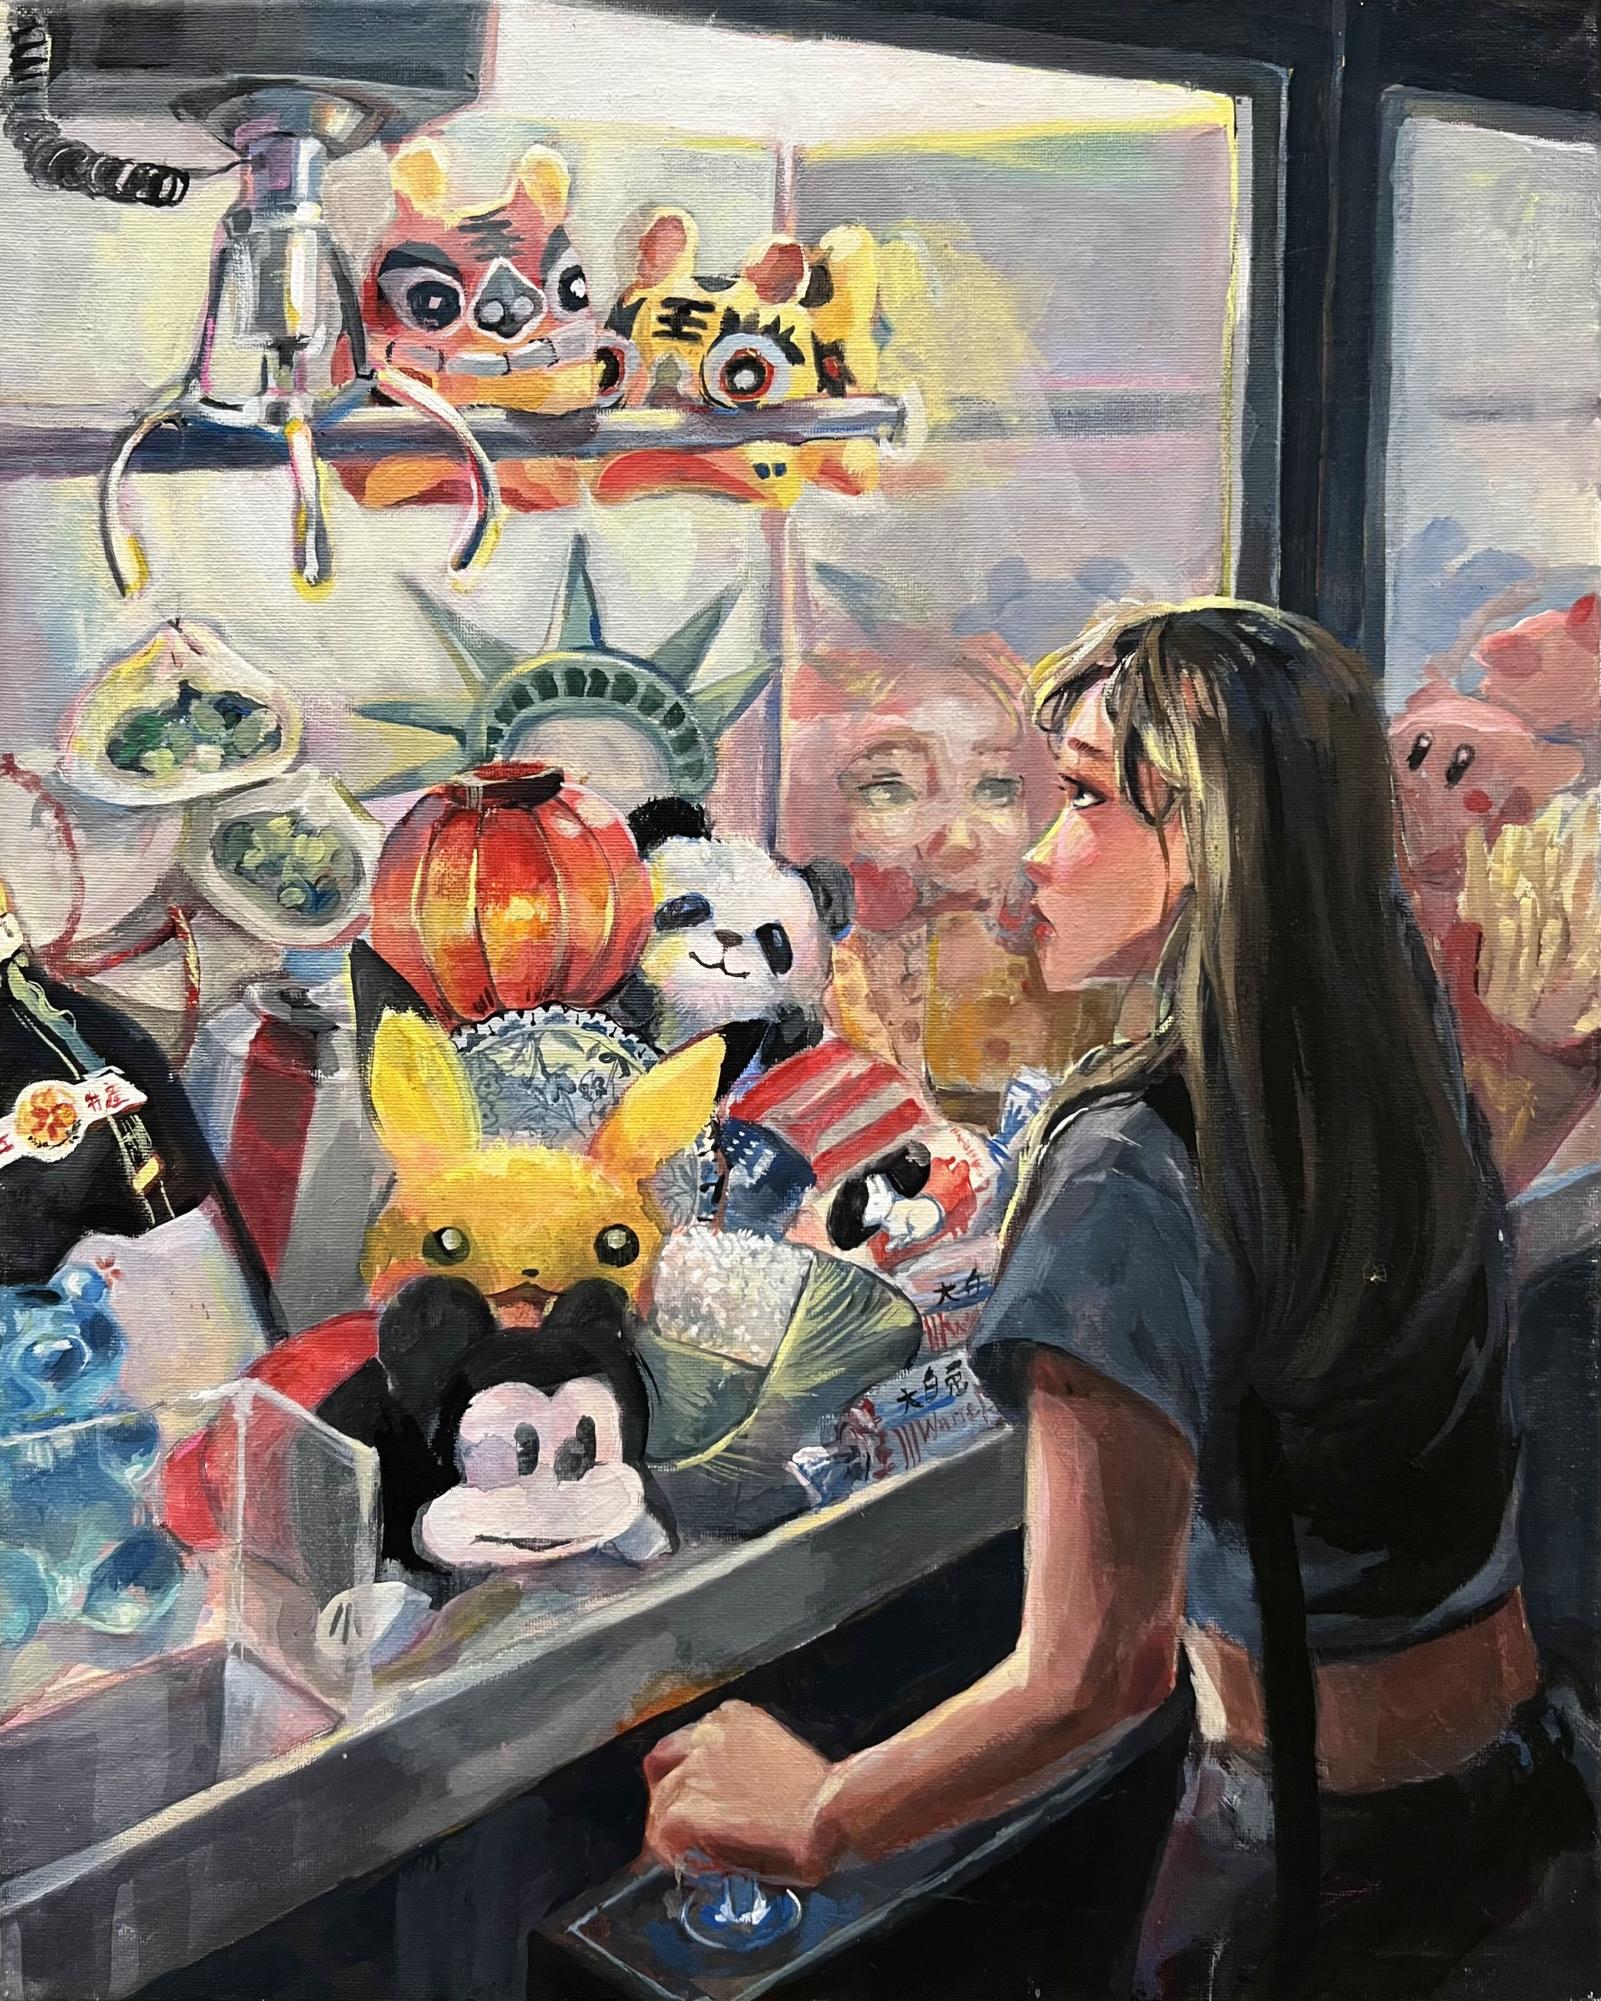 A painting of a girl in front of a claw machine is shown as the basis of man-made art. See how the style of the subsequent photos, generated by two different AI softwares, compare.